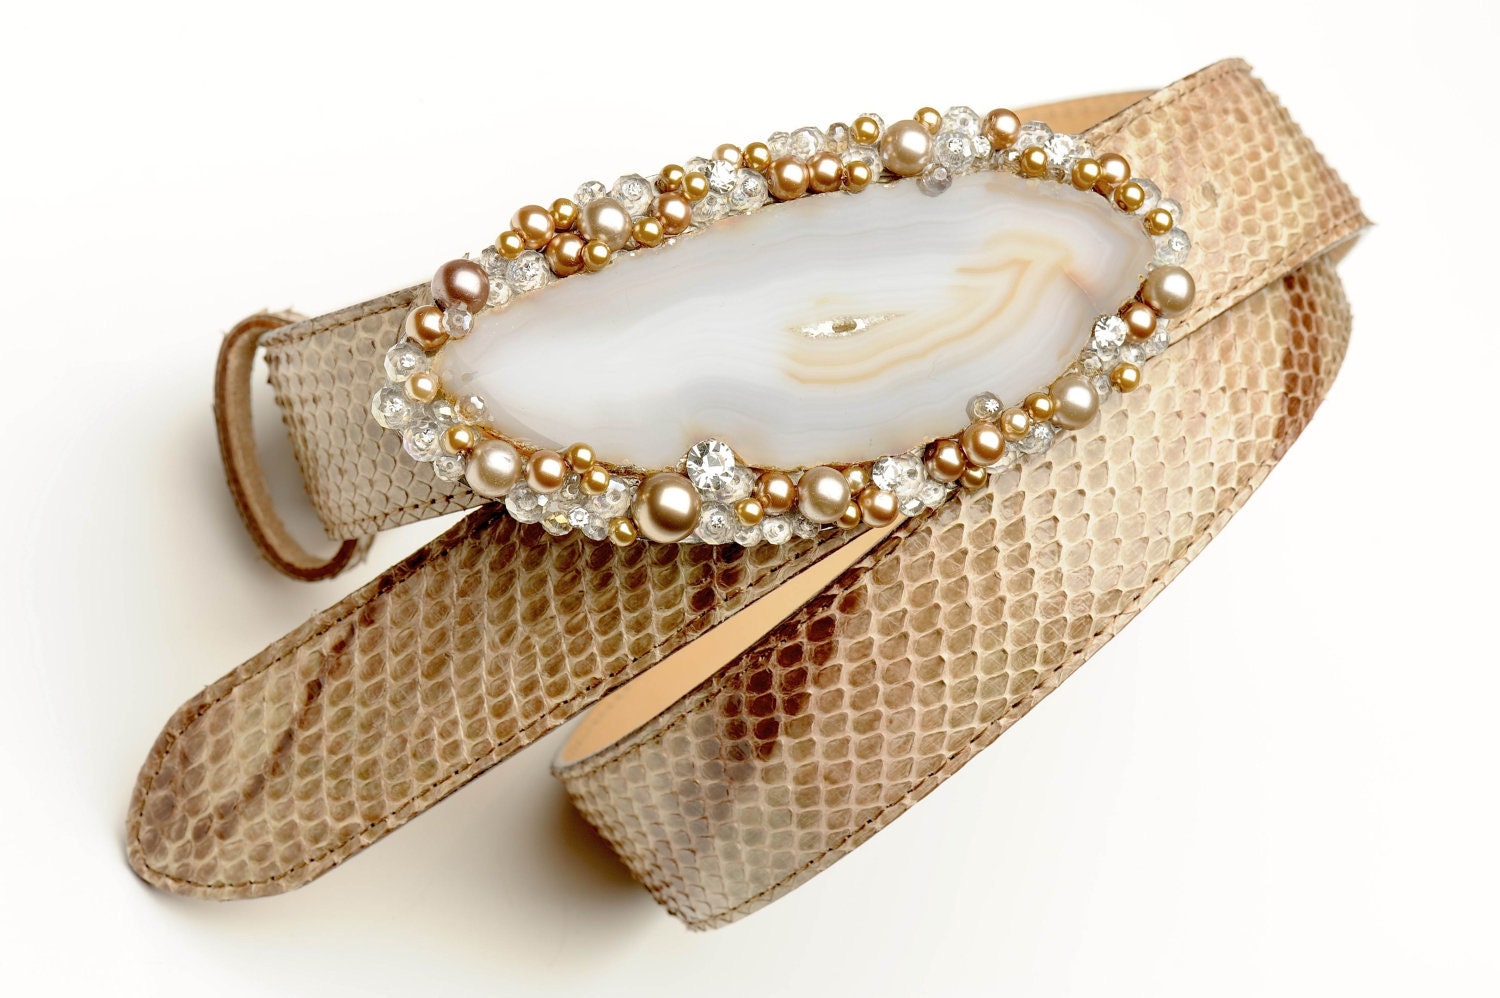 Jeweled belt buckle in agate and pearls with precious python skin belt - Holiday sale - Regular price 350.00 USD reduced to 300.00 USD